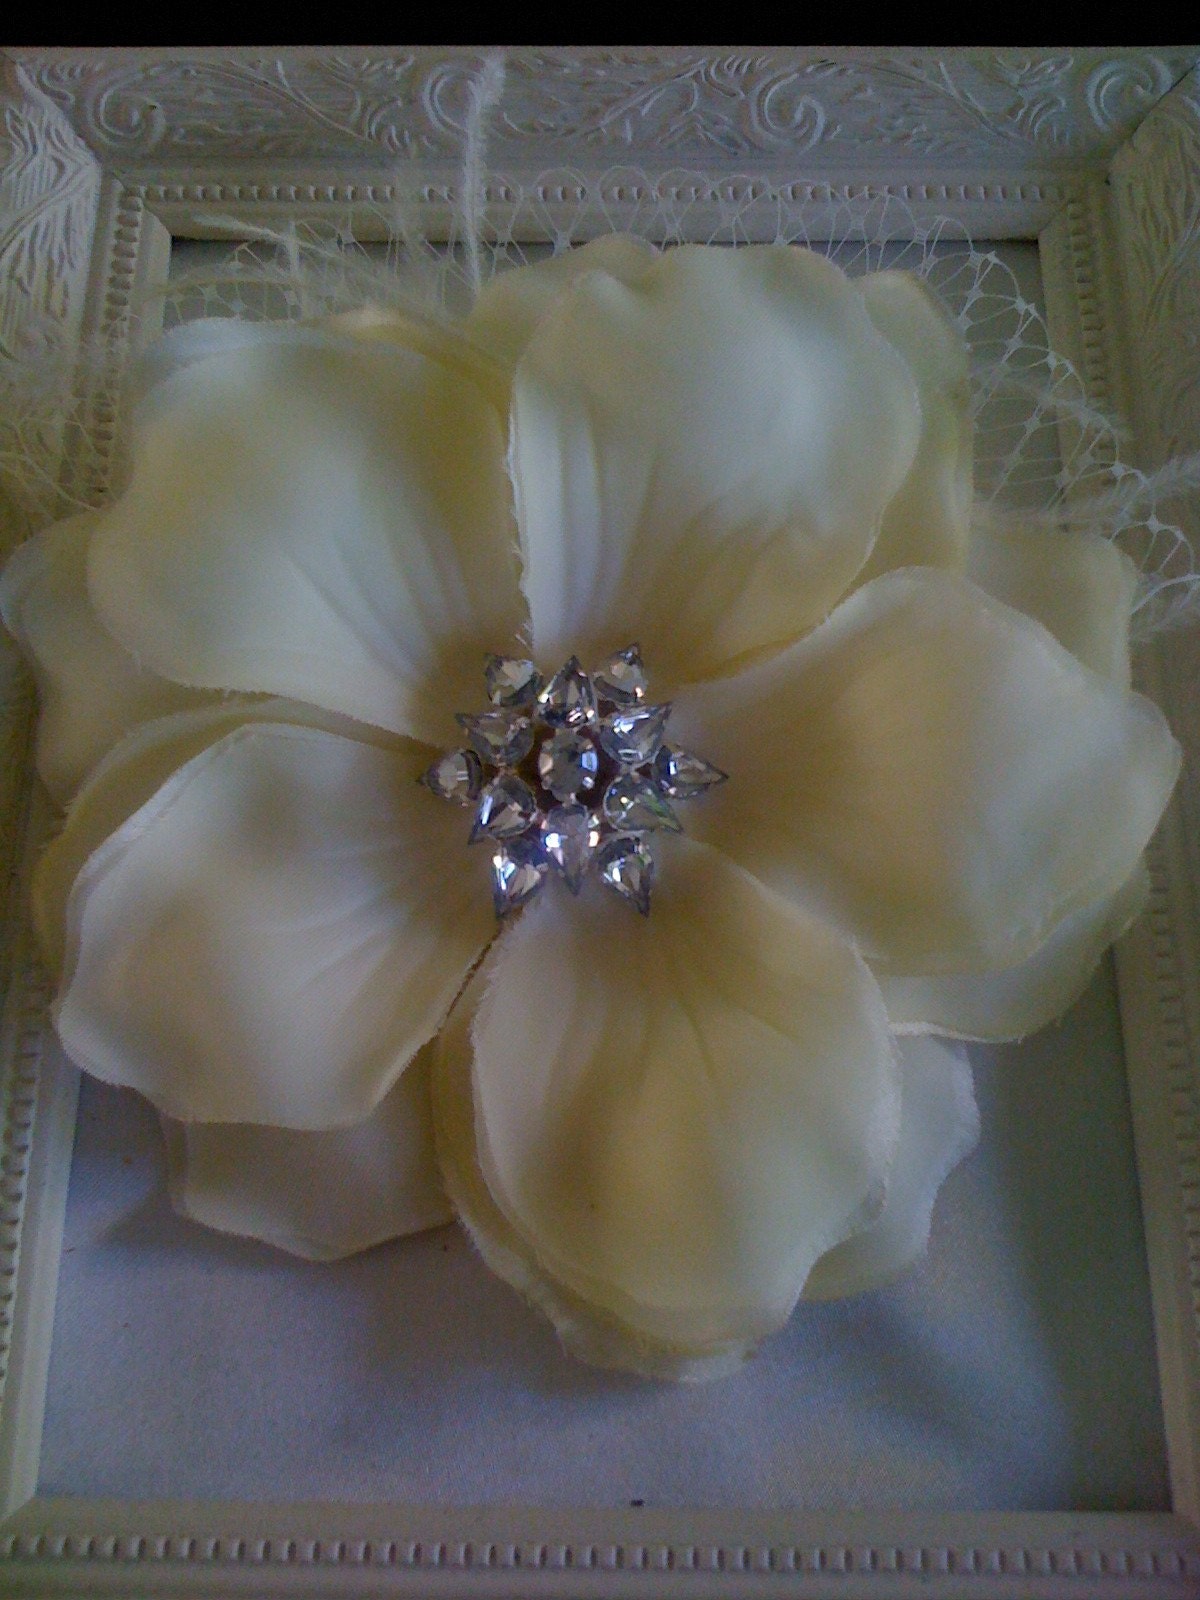 STUNNING IVORY FLOWER WITH SHIMMERING by Emerald Diamond Fascinators on Etsy